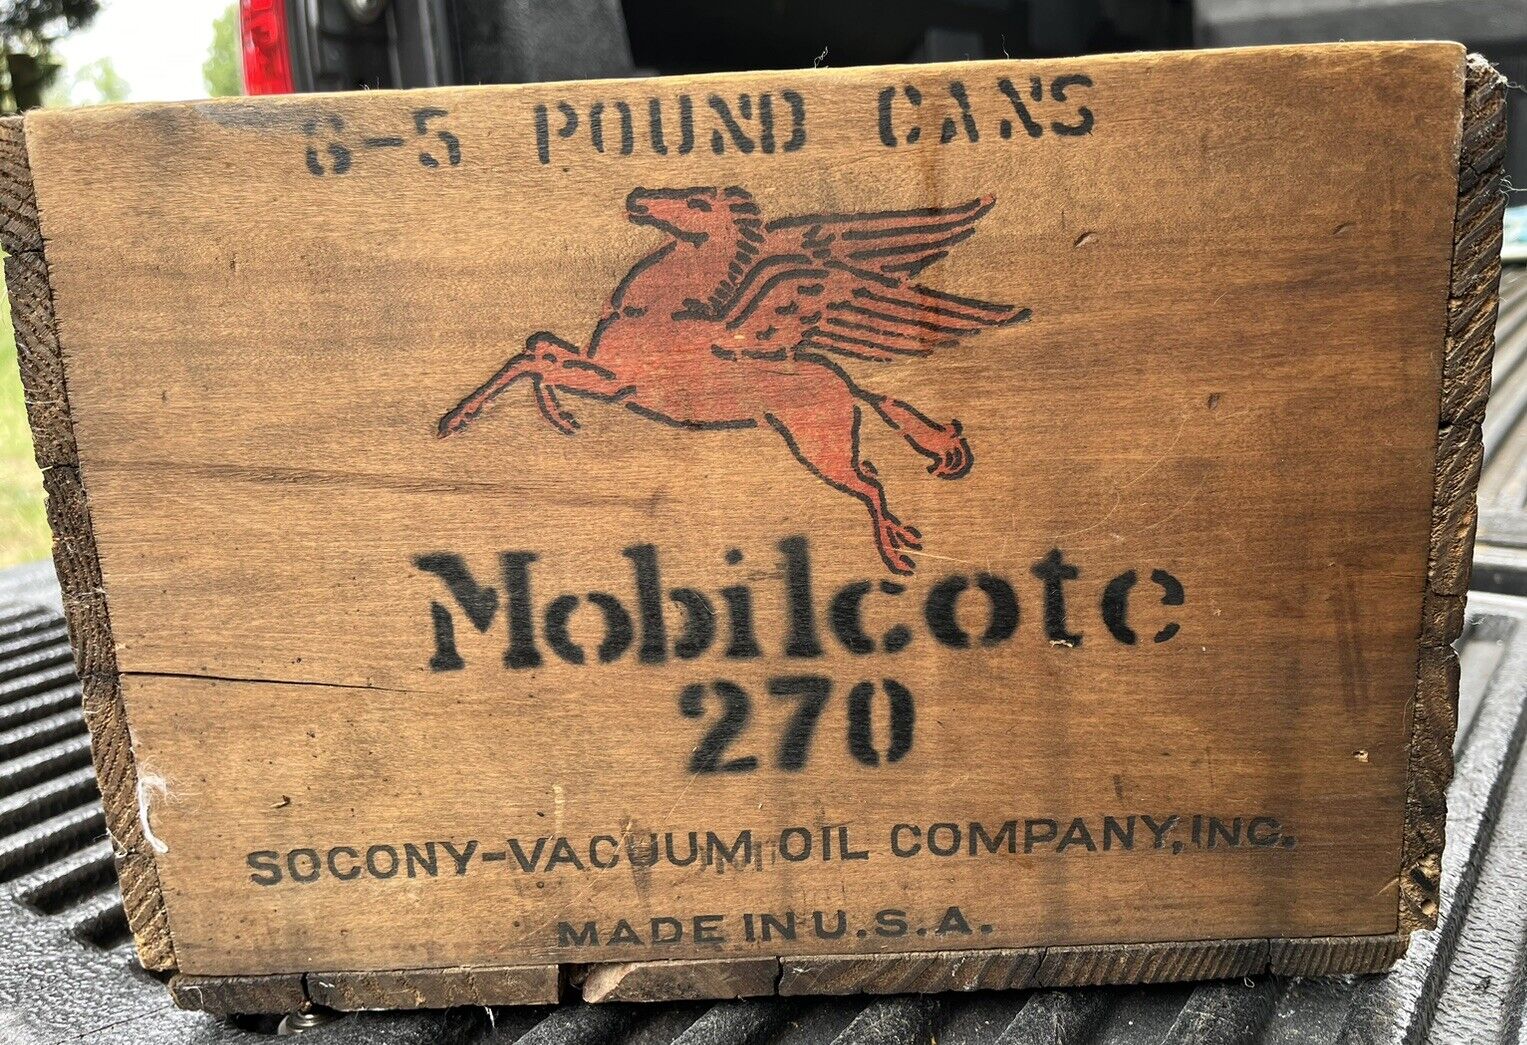 Rare VTG Mobilcote 270 Oil Wooden Crate Gas & Oil Man Cave Advertising